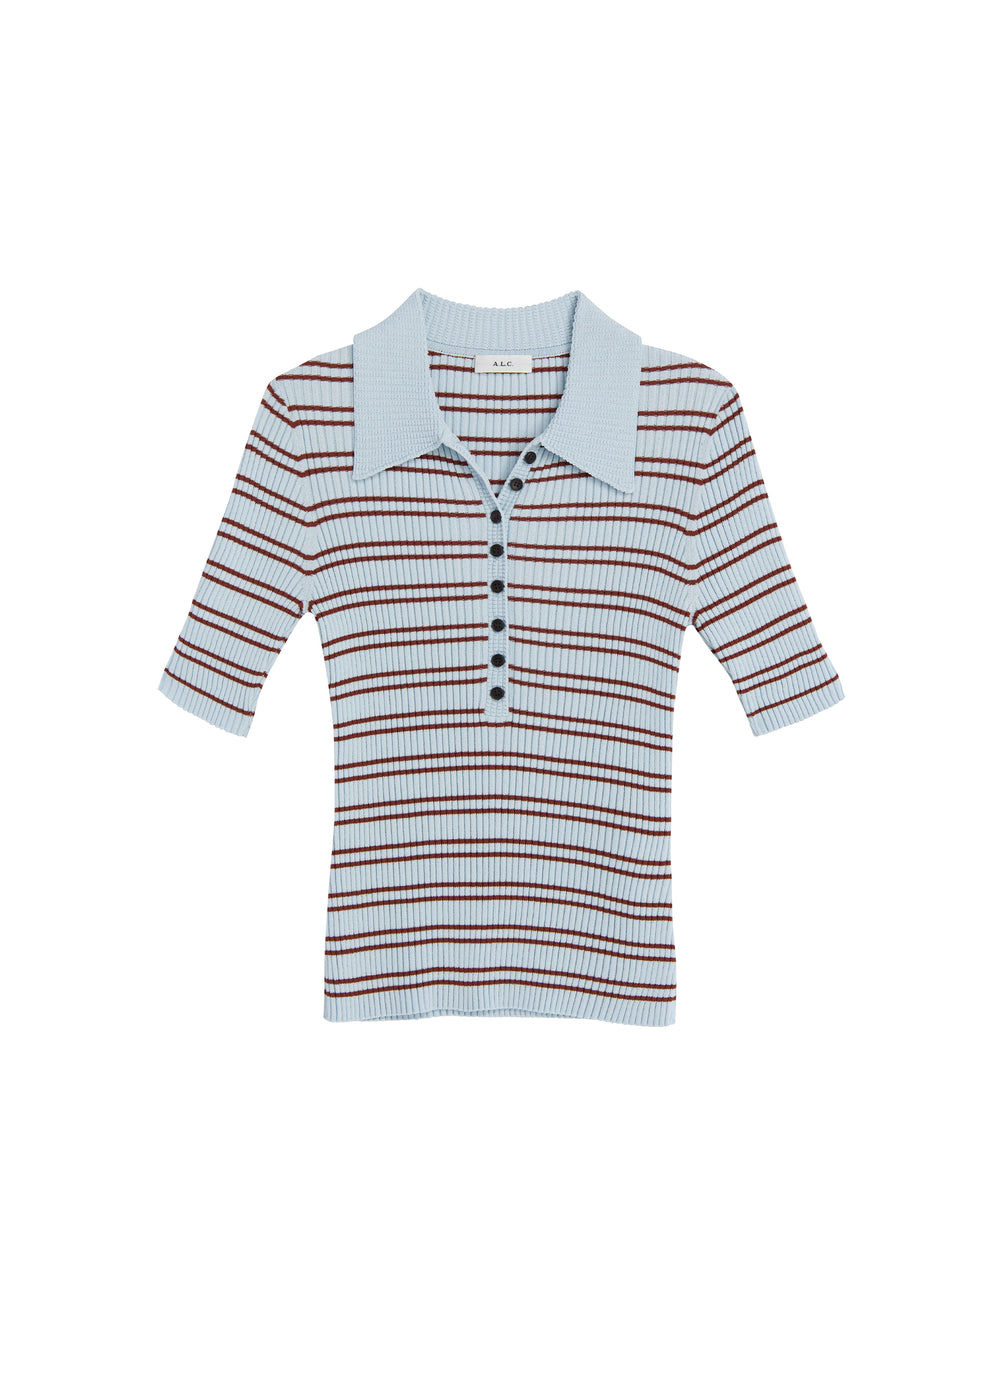 flatlay of blue and brown striped shirt